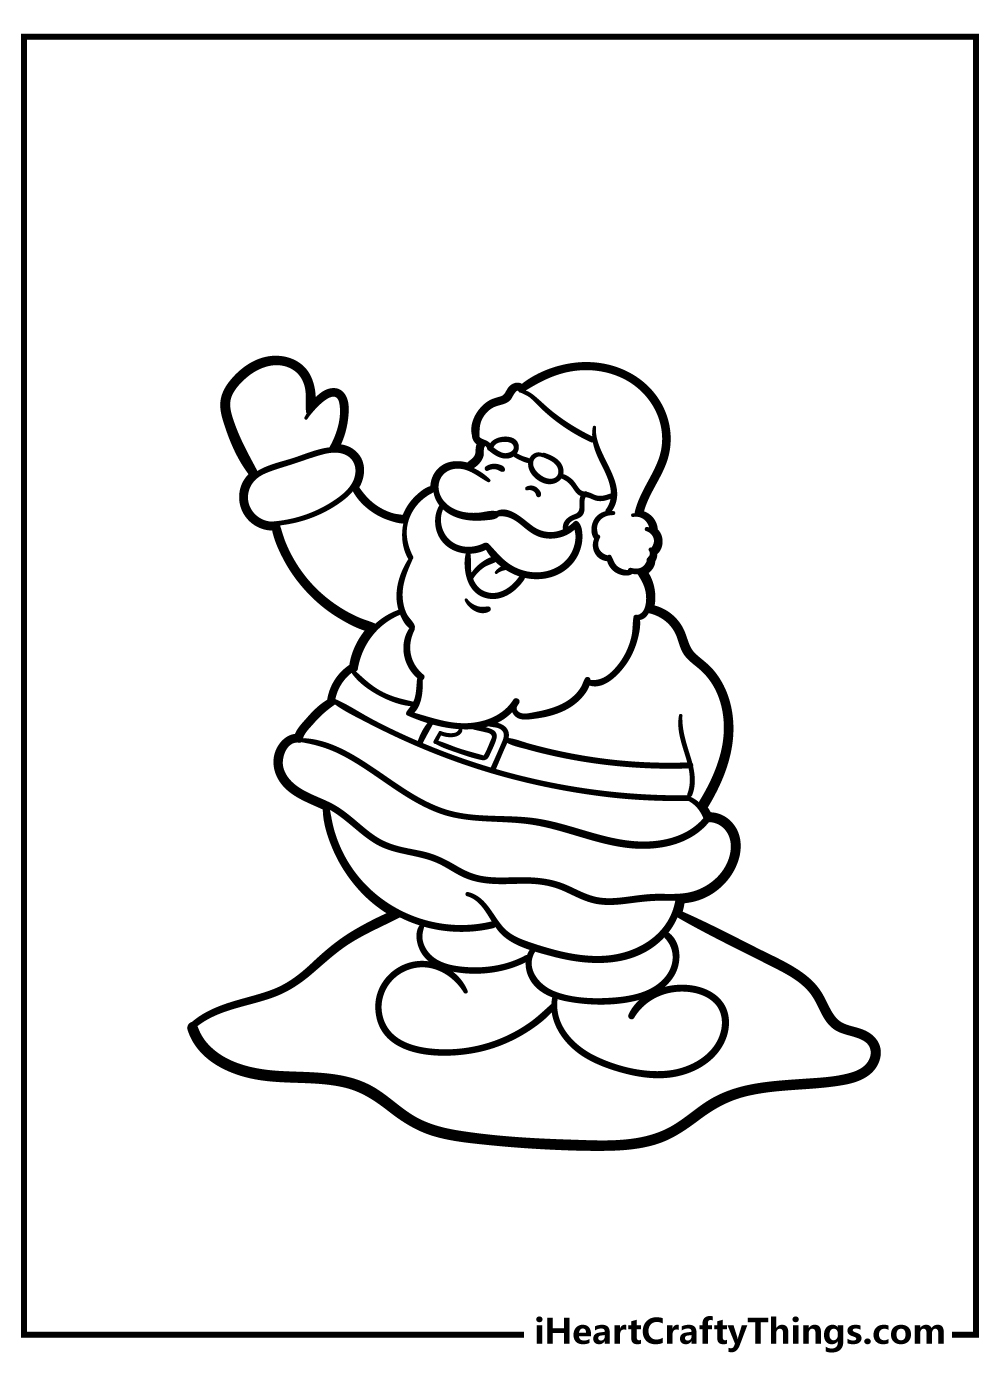 Cute Santa Christmas Coloring Pages for preschoolers free printable